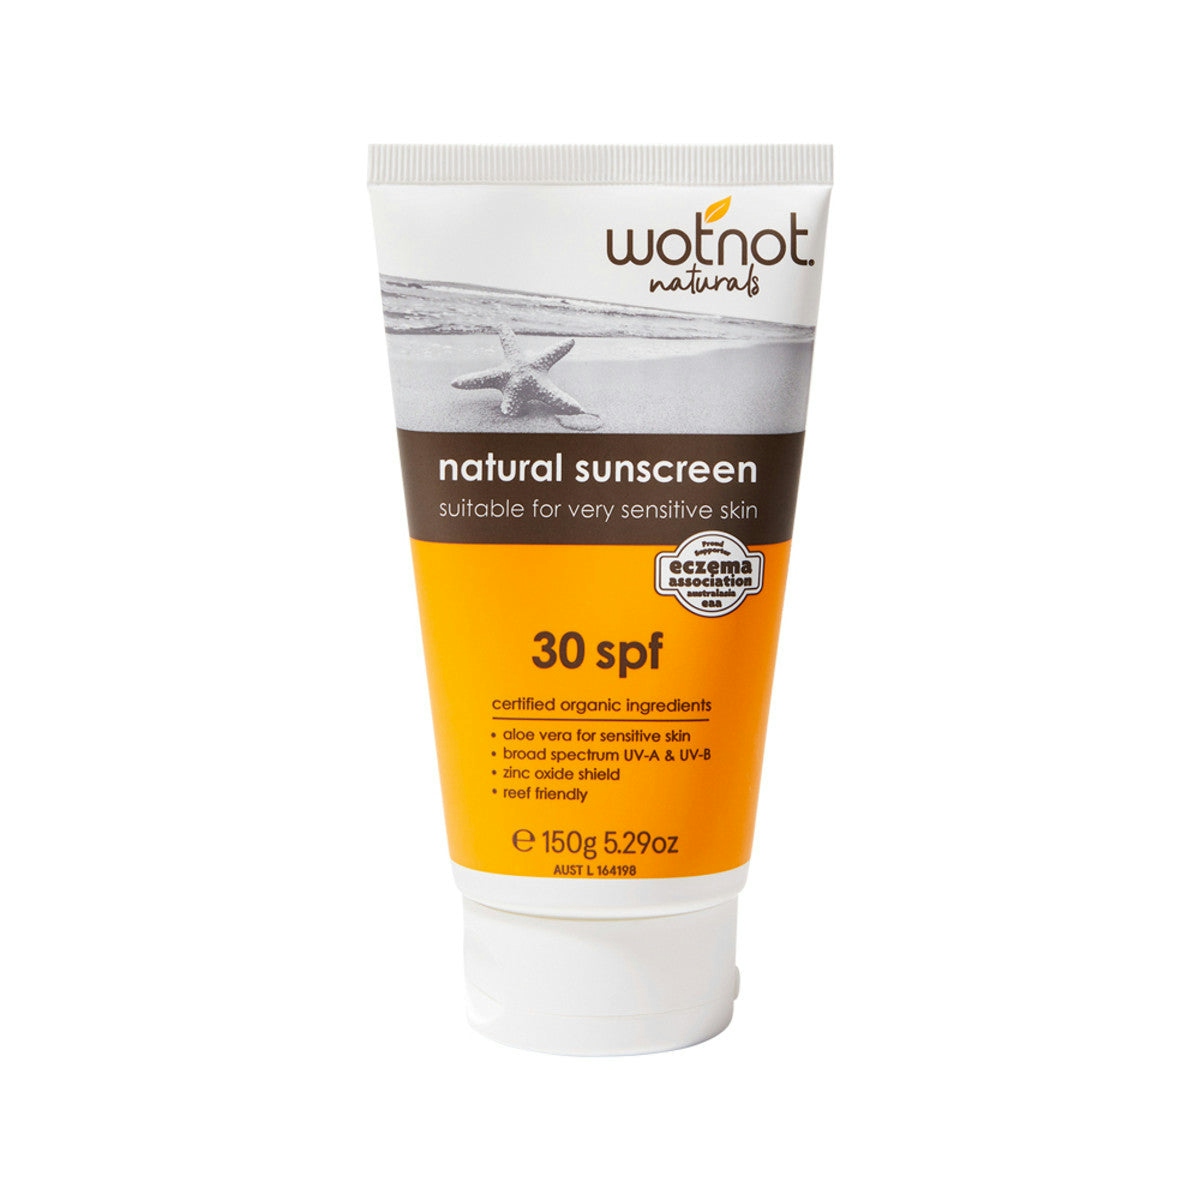 image of Wotnot Natural Sunscreen 30 SPF 150g on white background